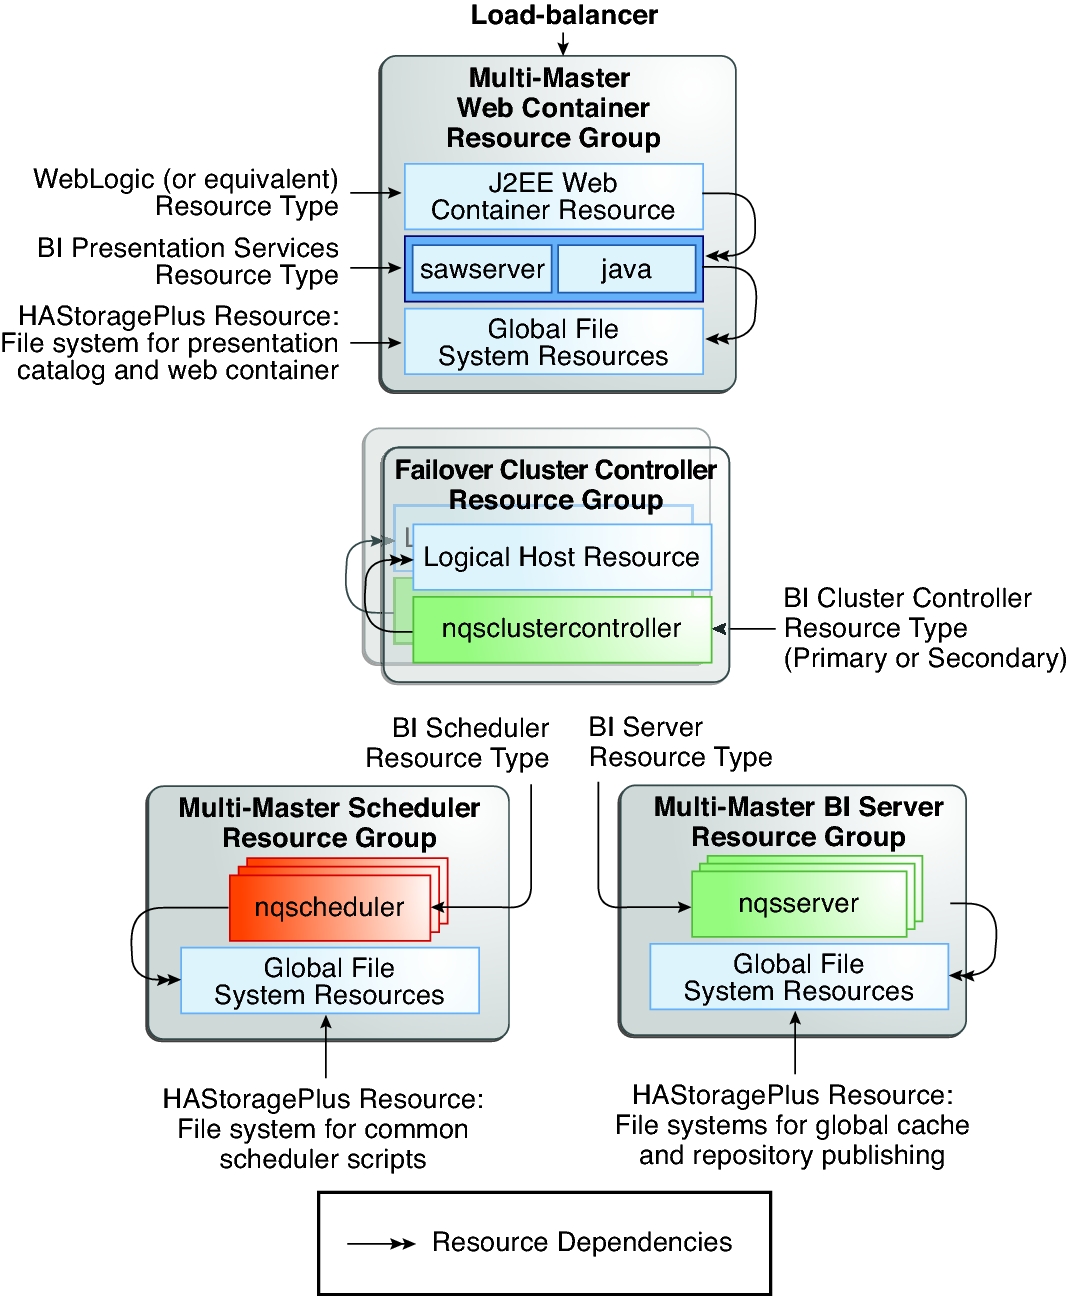 image:Figure shows relationships of resources for multi-master 							configuration.